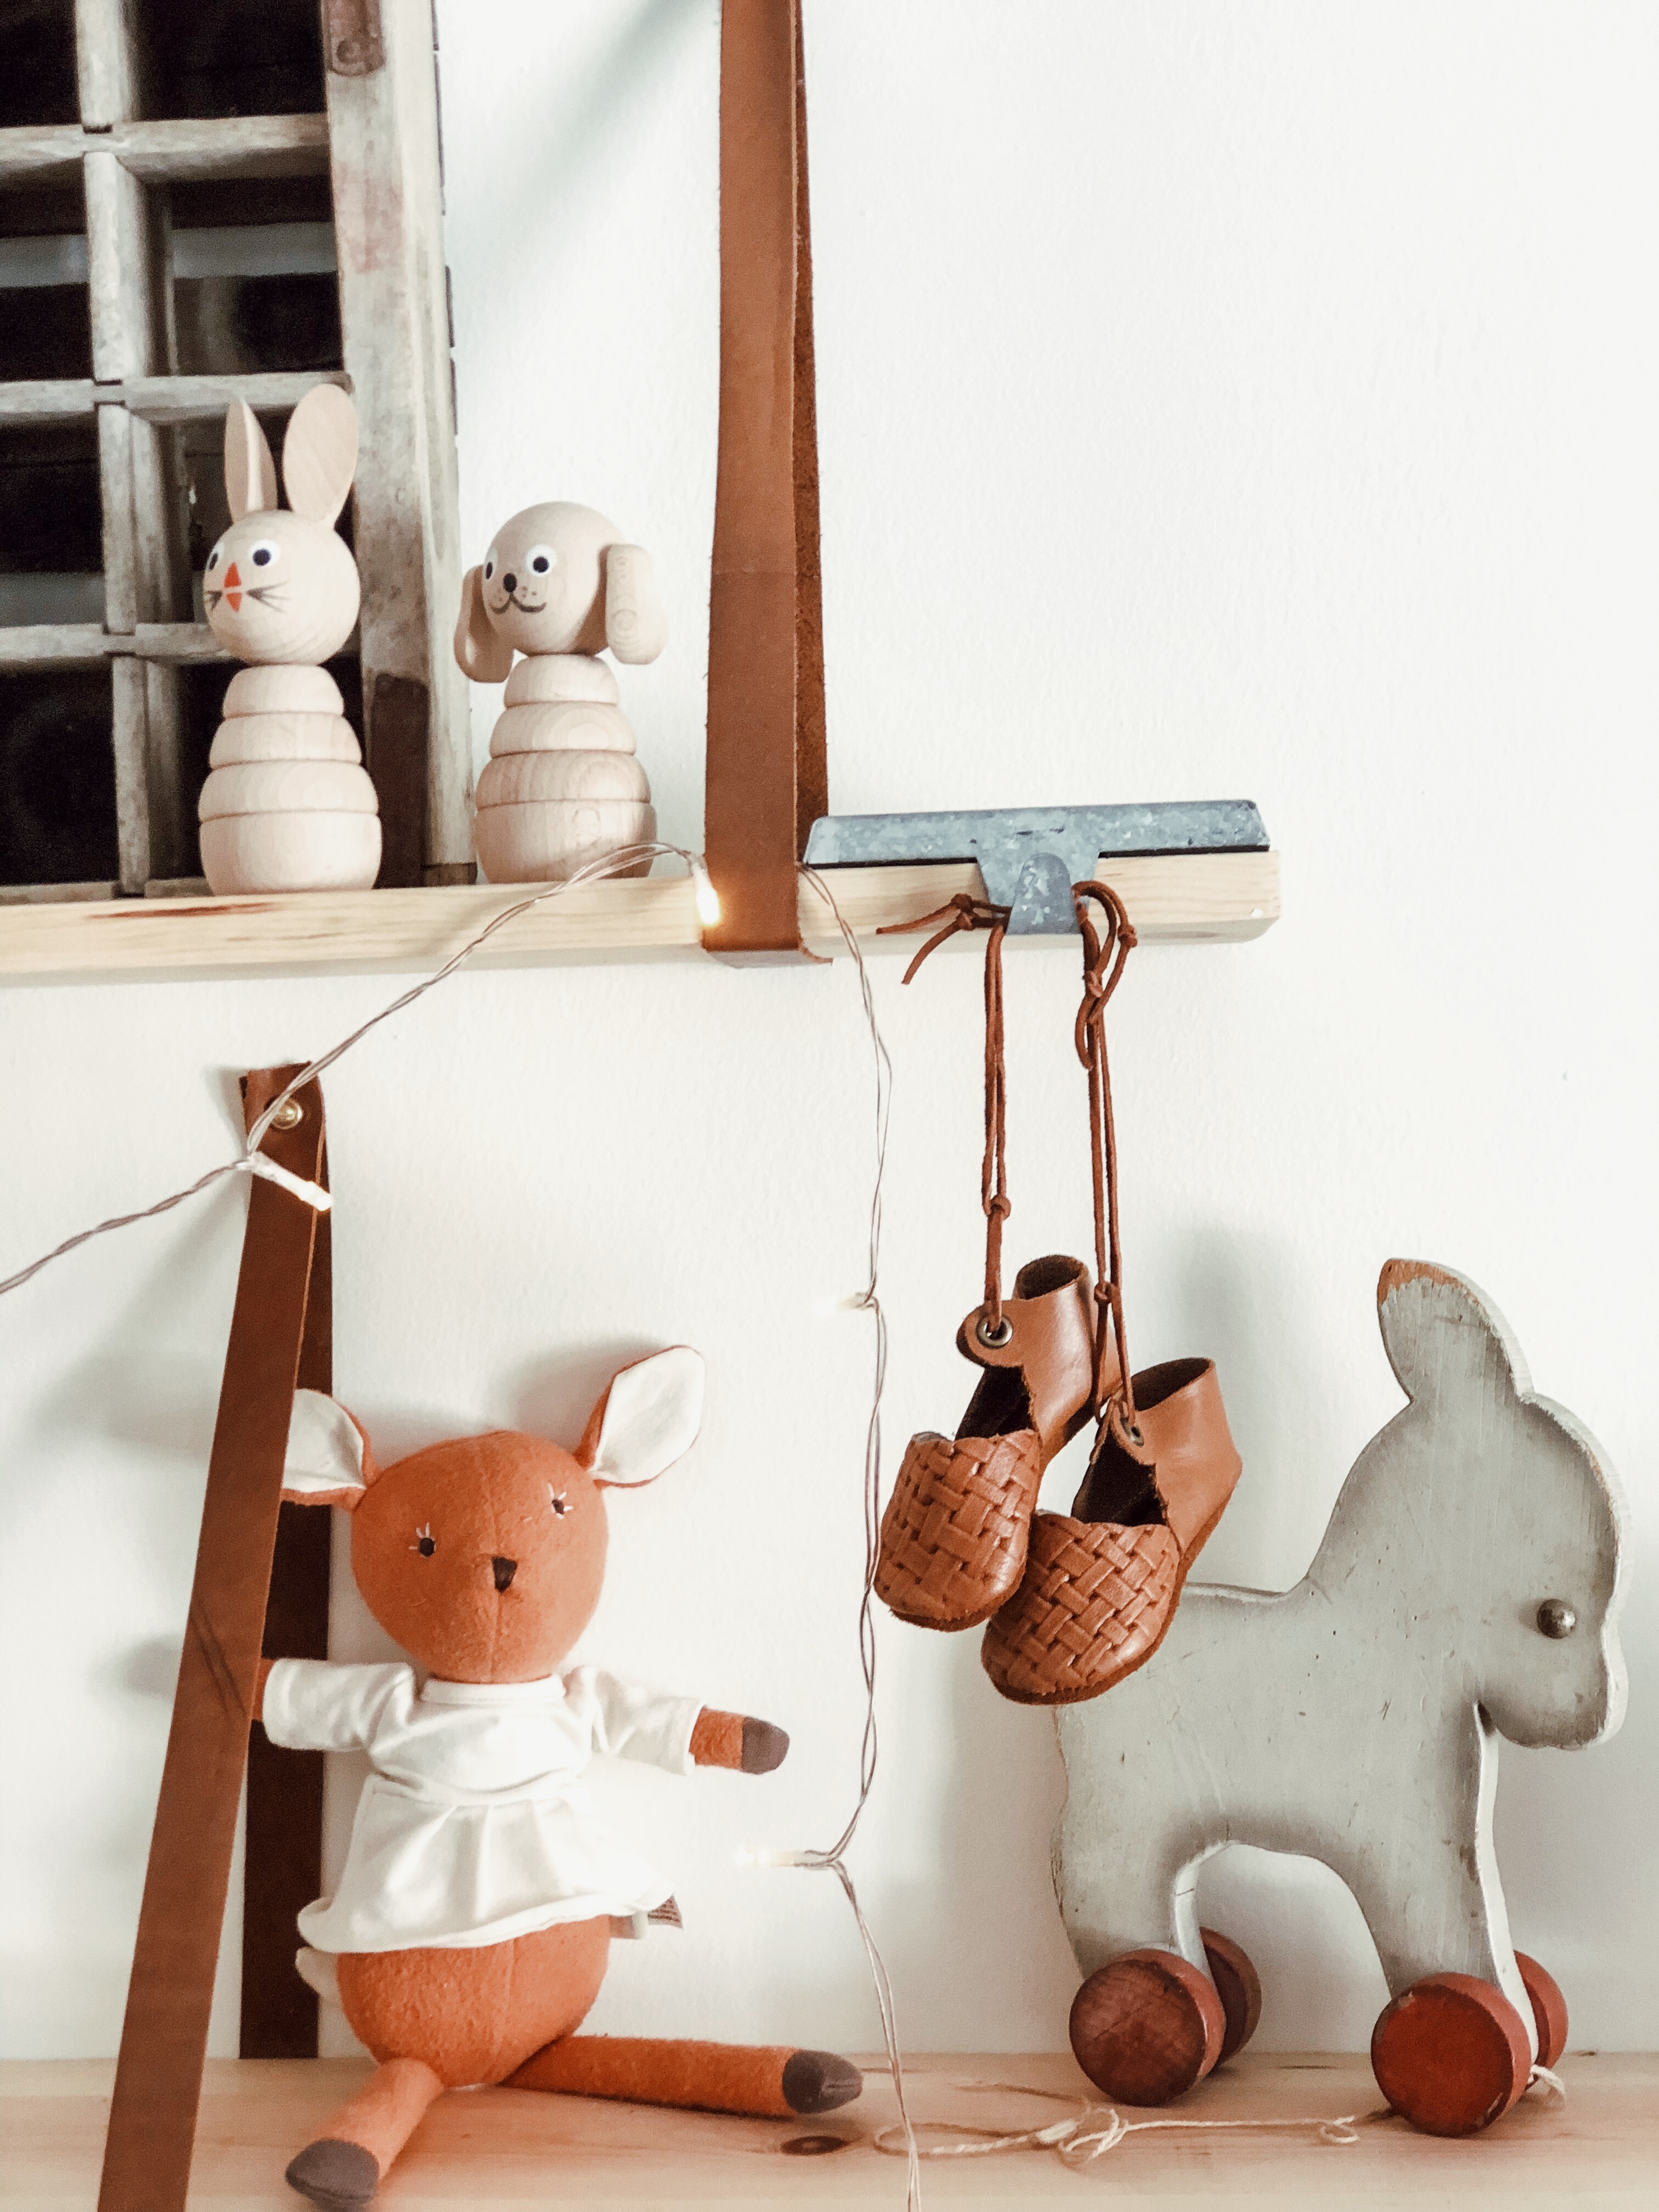 Nursery Shelves Styled with Toys